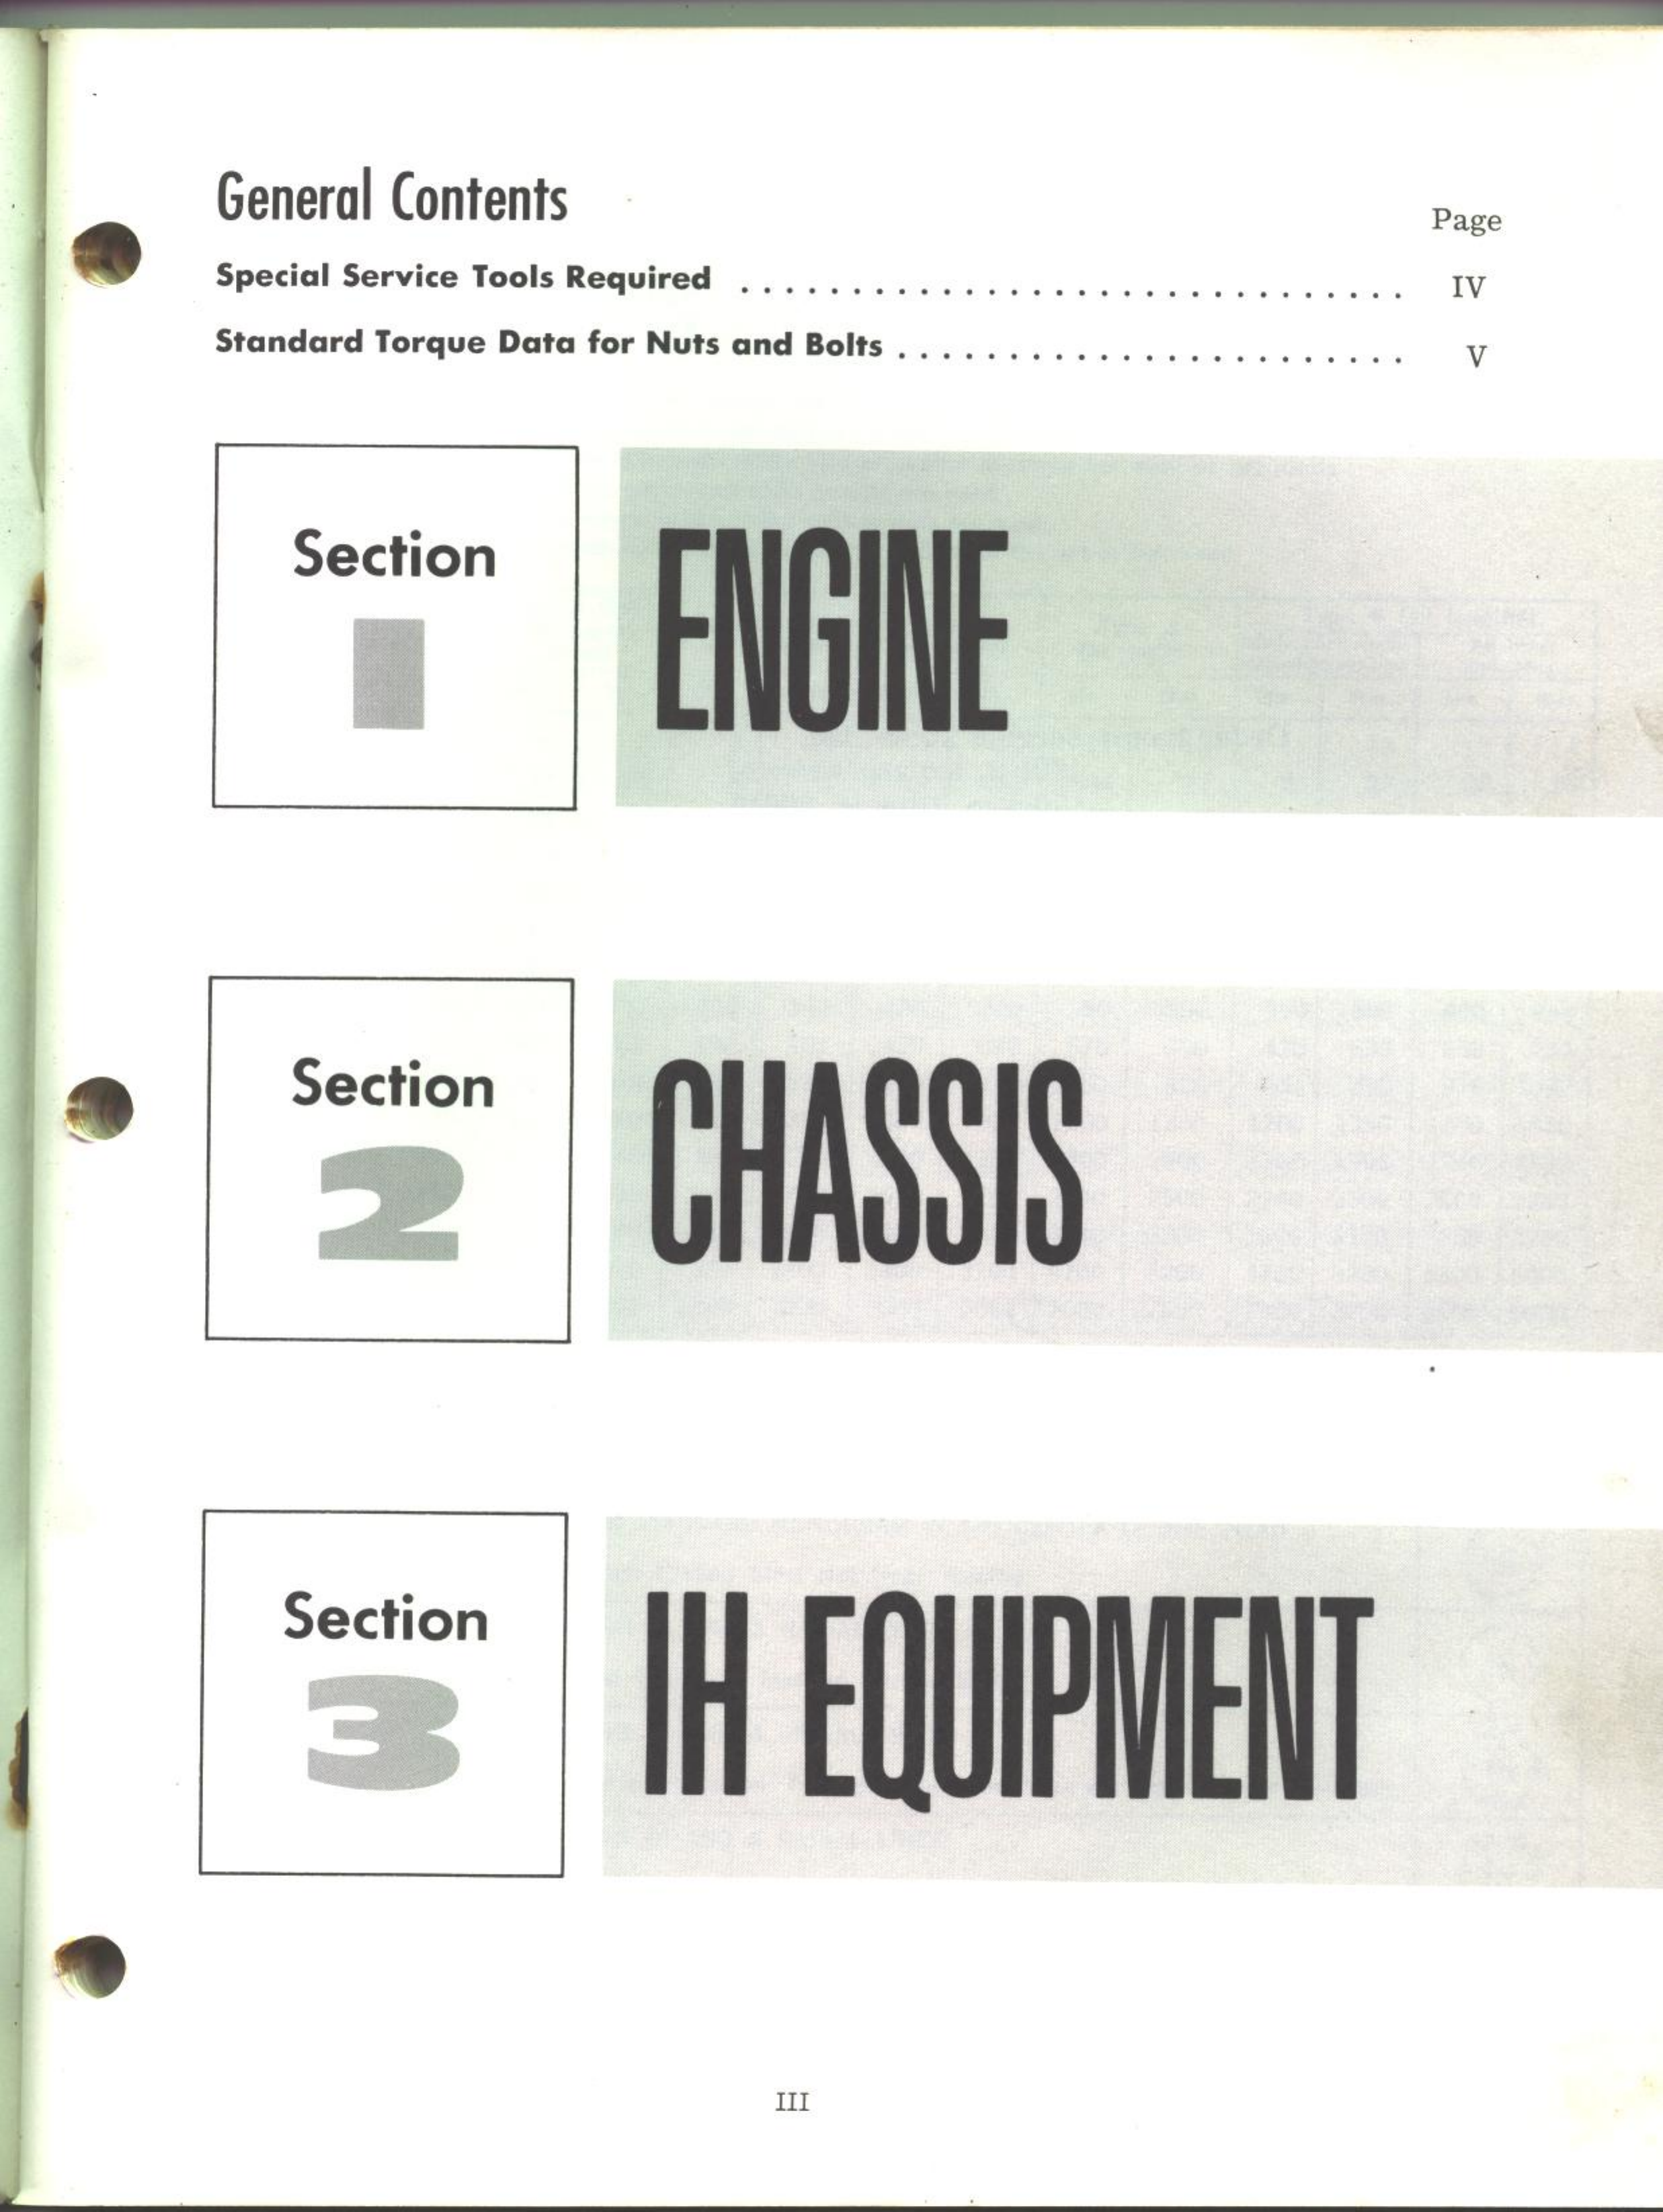 1967-1969 International Cub Cadet™ 72, 104, 105, 124, 125 tractor manual Preview image 3